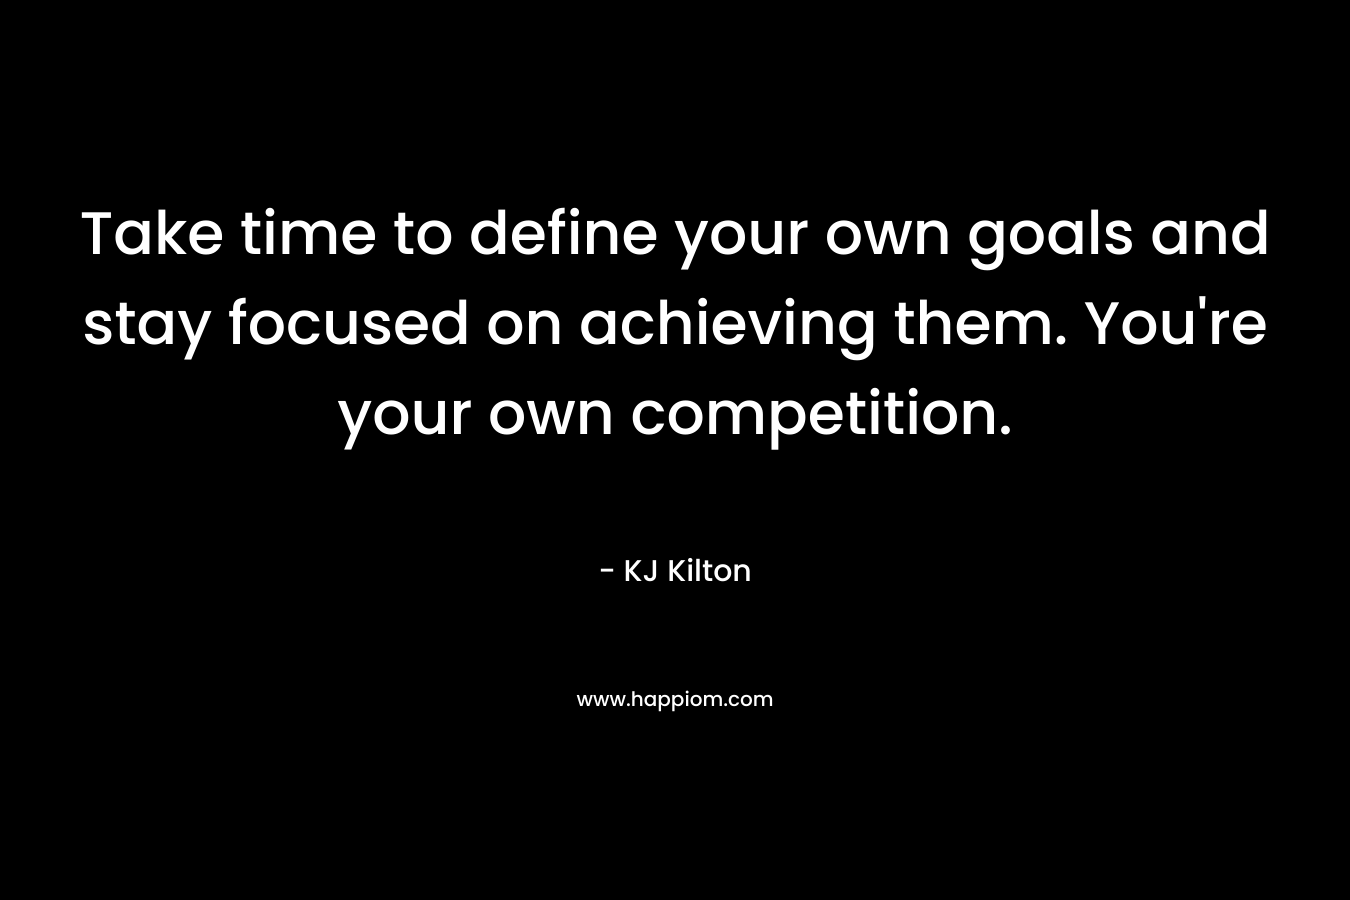 Take time to define your own goals and stay focused on achieving them. You’re your own competition. – KJ Kilton